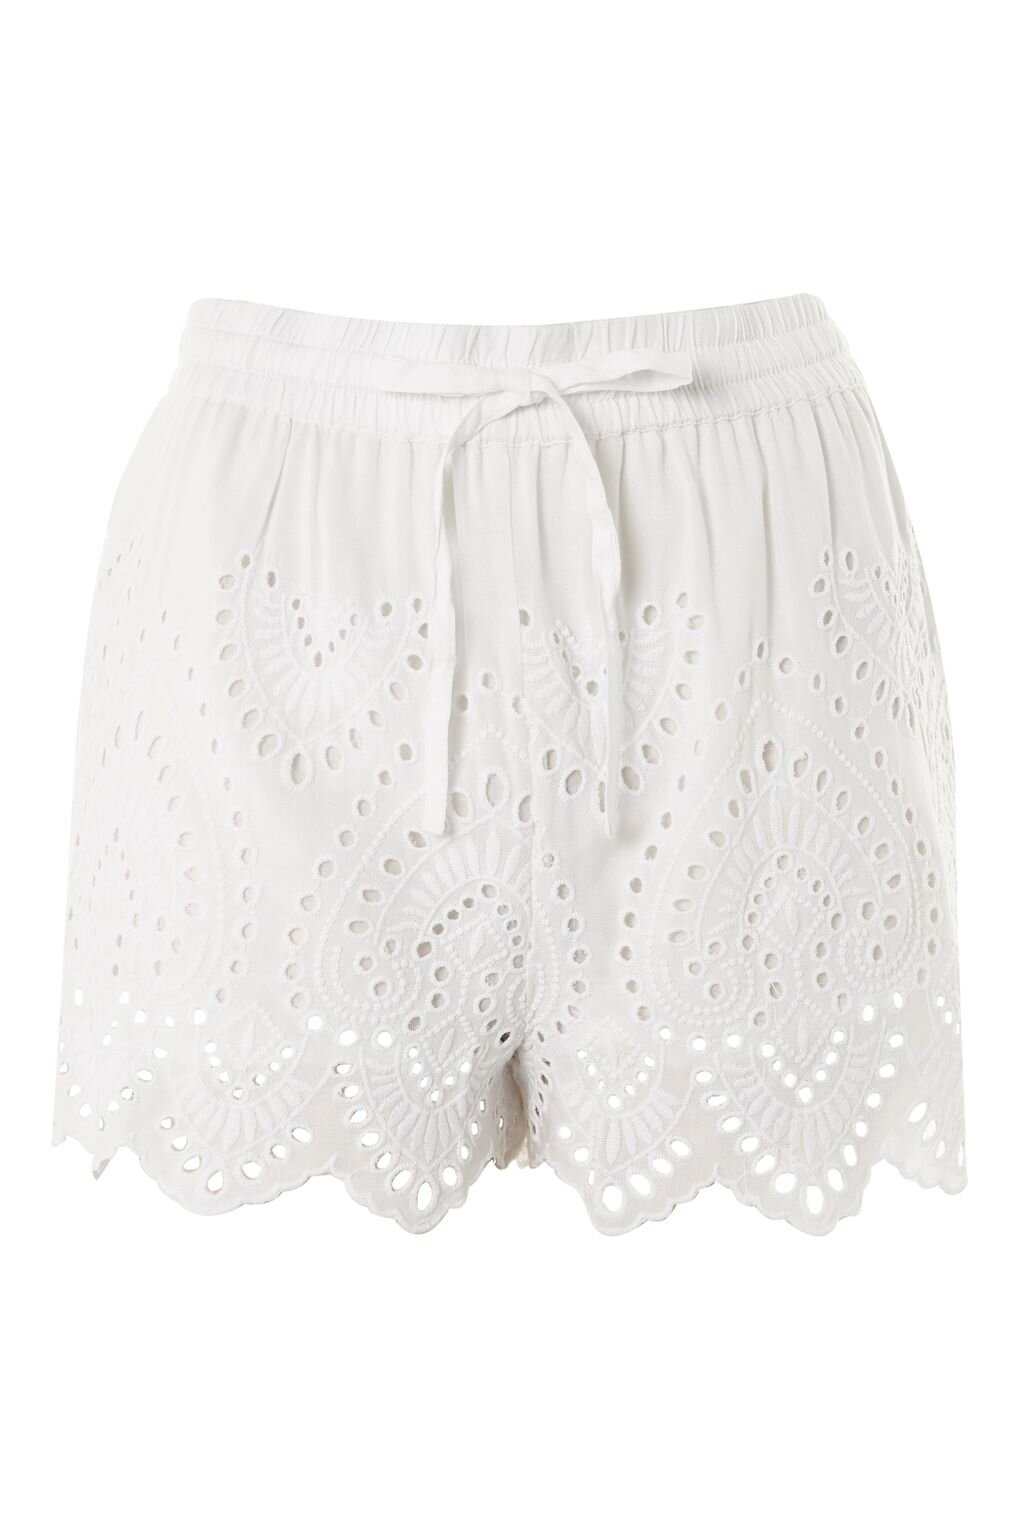 Topshop Cutwork Broderie Shorts — UFO No More